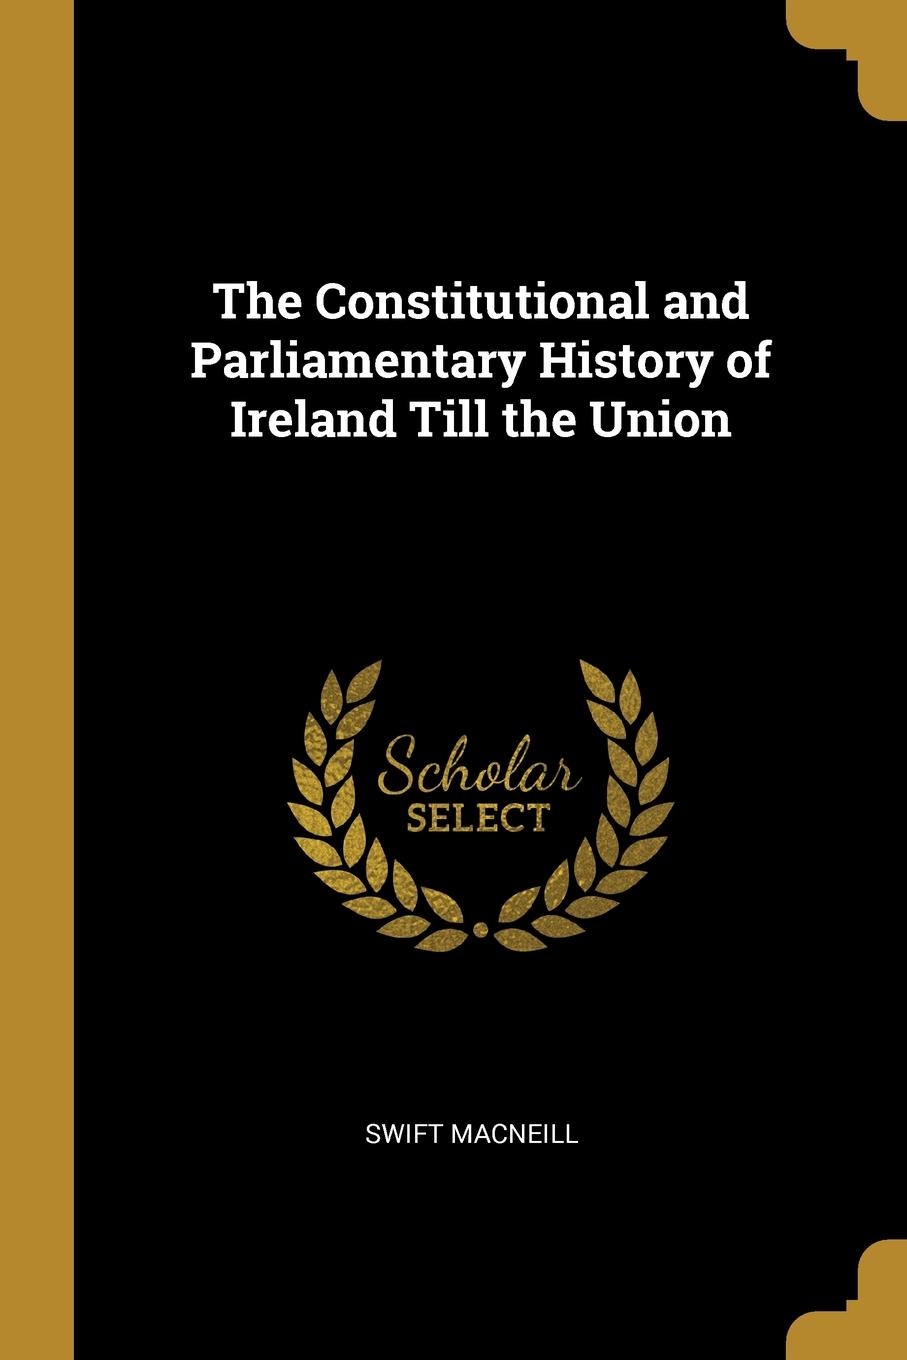 The Constitutional and Parliamentary History of Ireland Till the Union